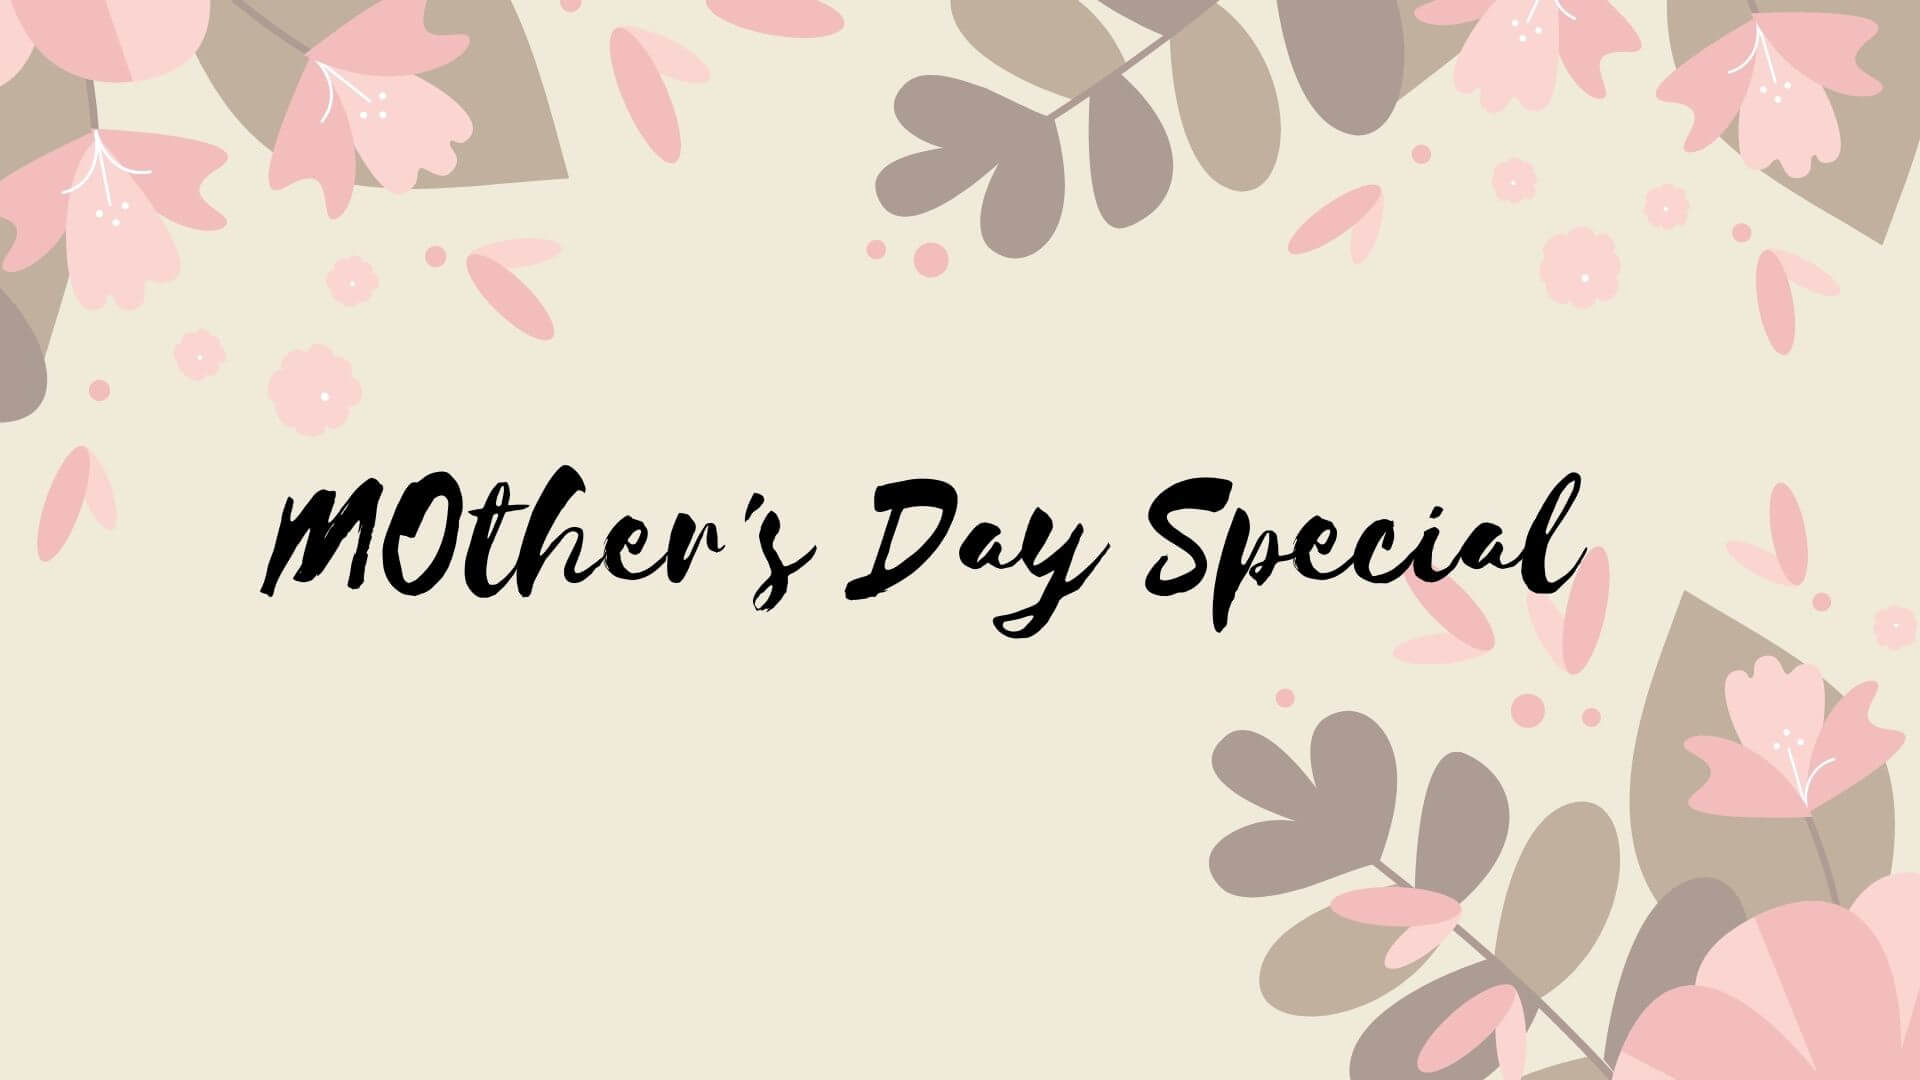 067: Mother’s Day Special Episode